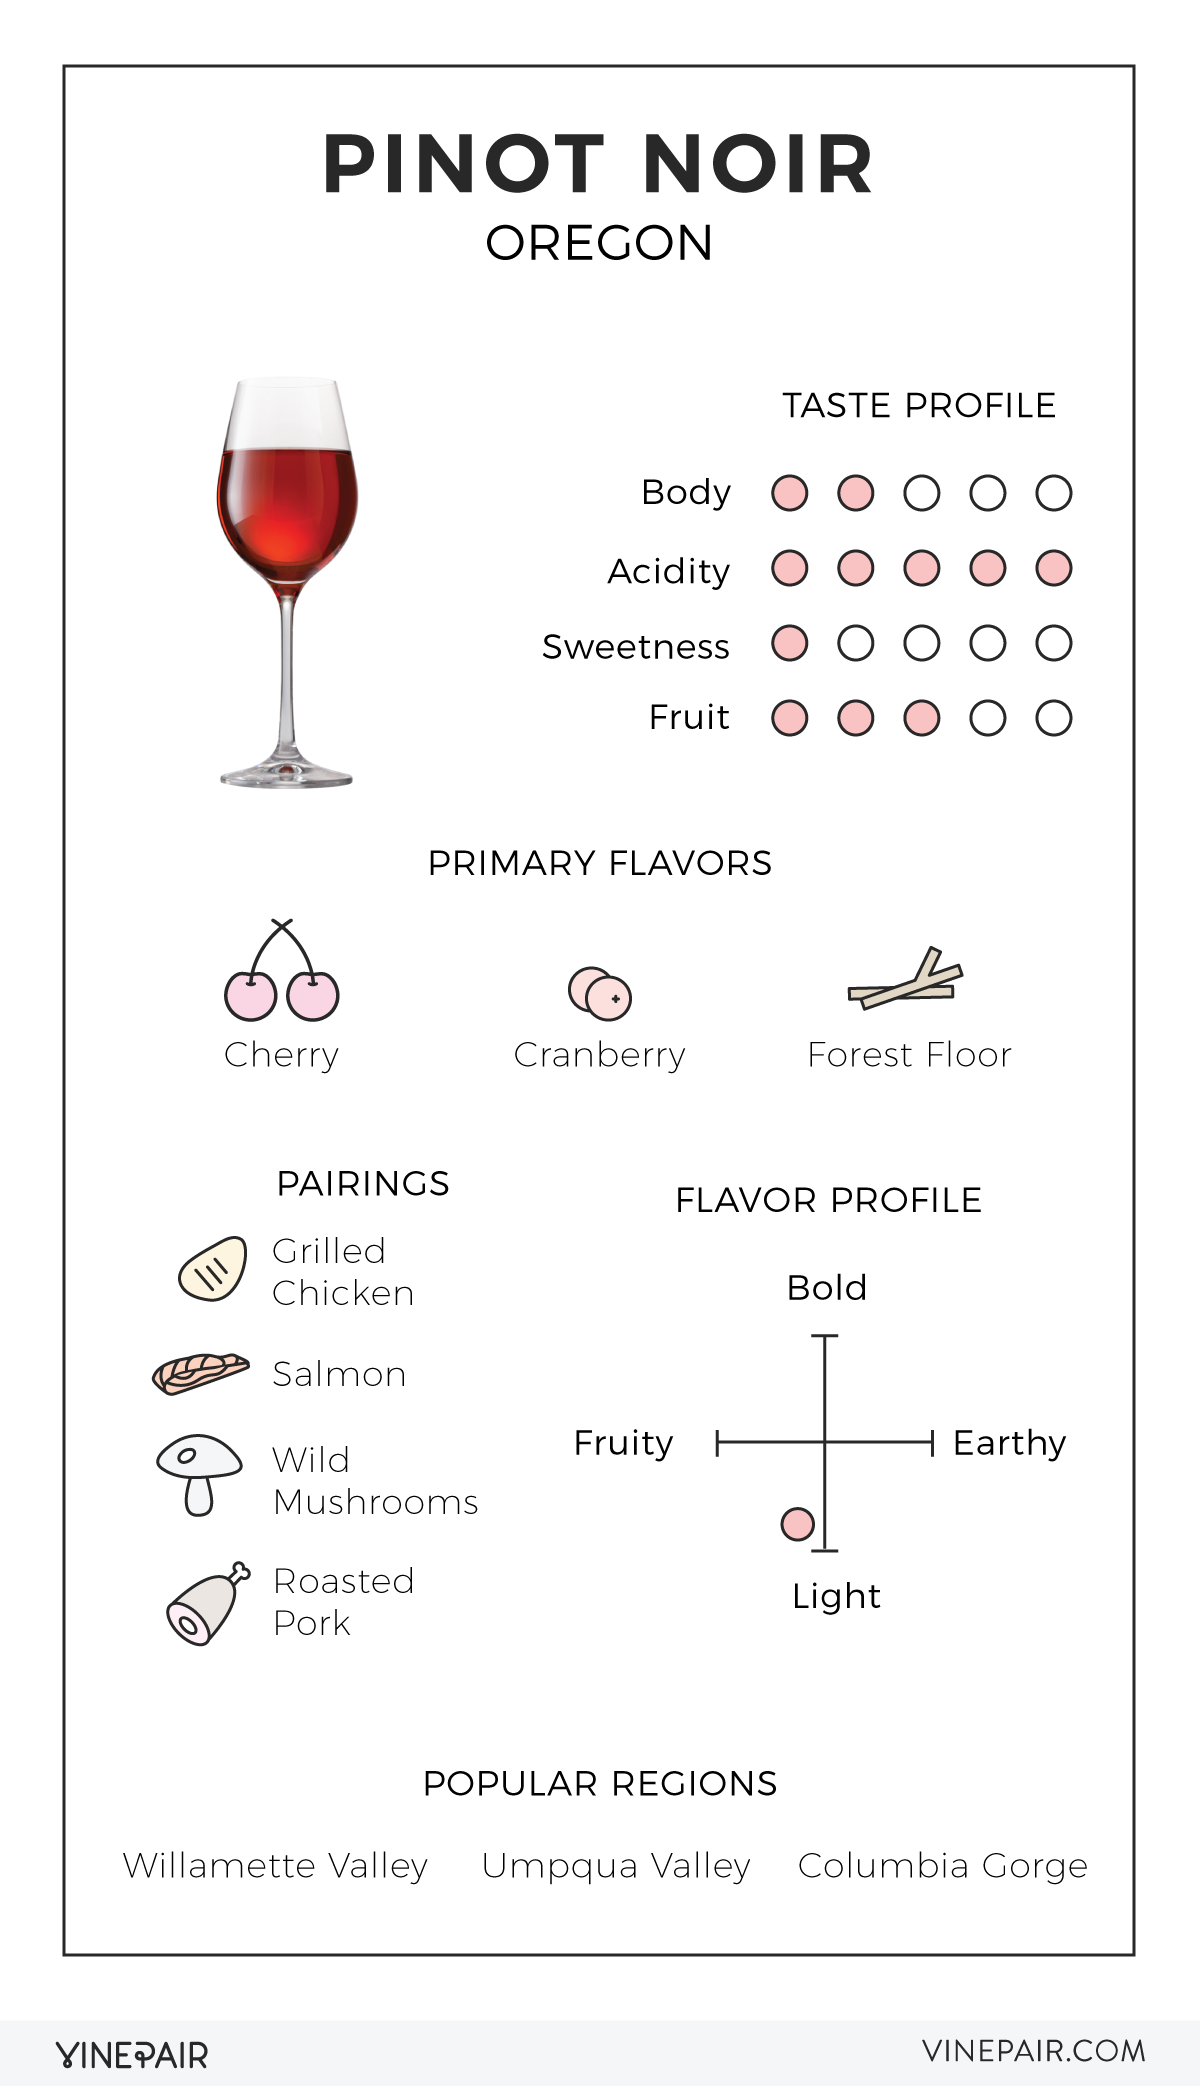 An Illustrated Guide to Pinot Noir From Oregon